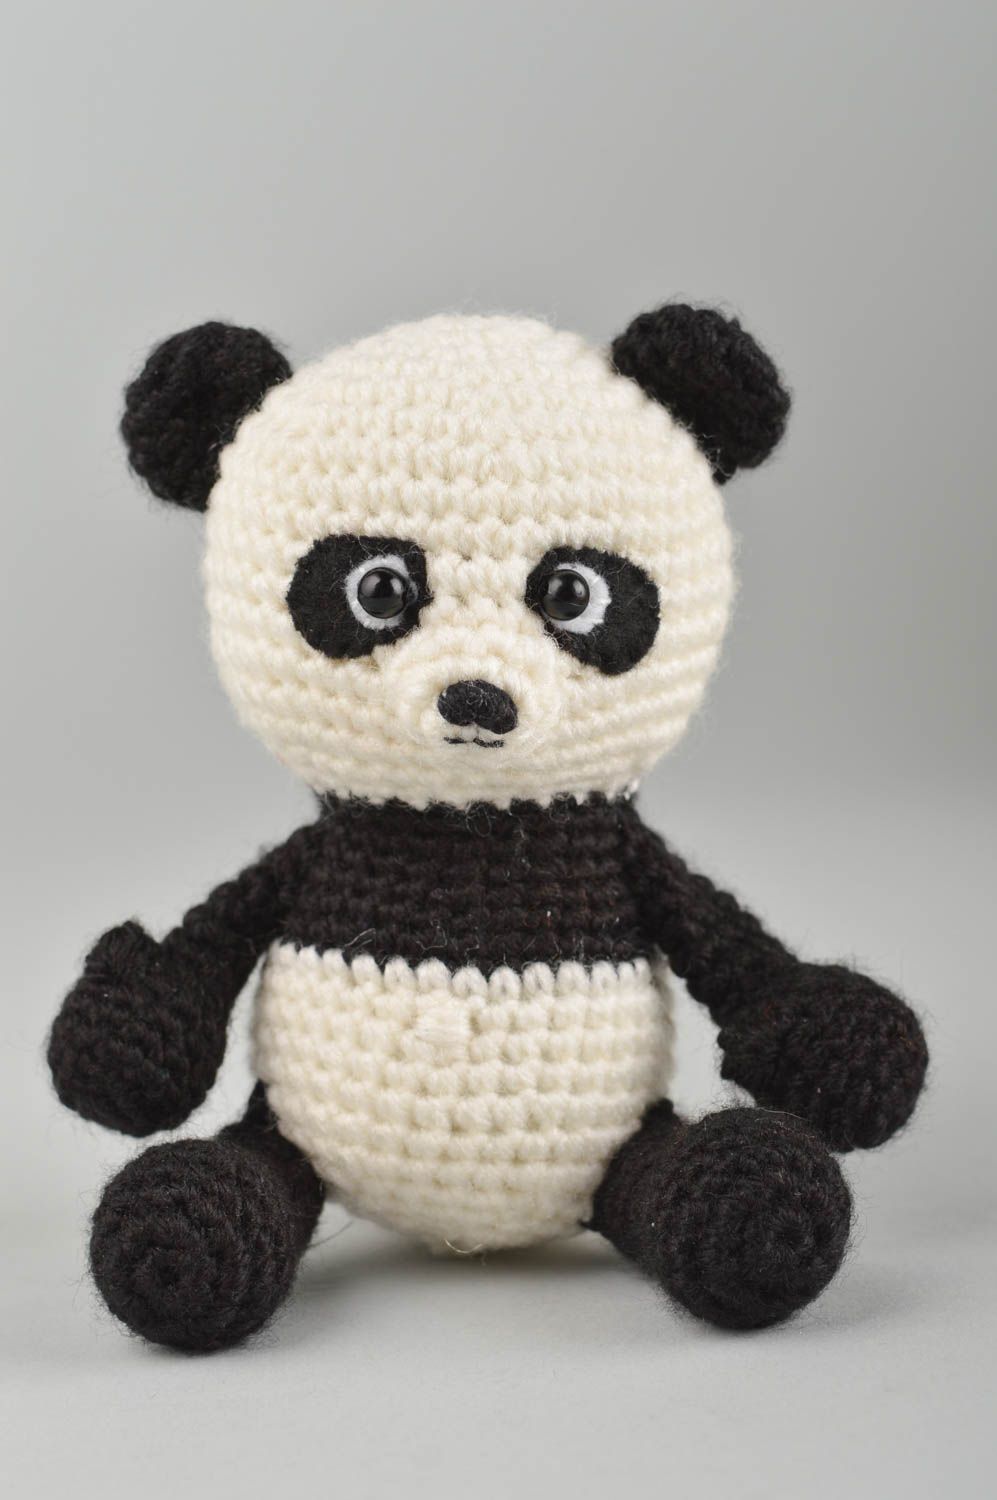 Handmade crocheted toy baby soft toy crocheted panda toy design crocheted toy   photo 2